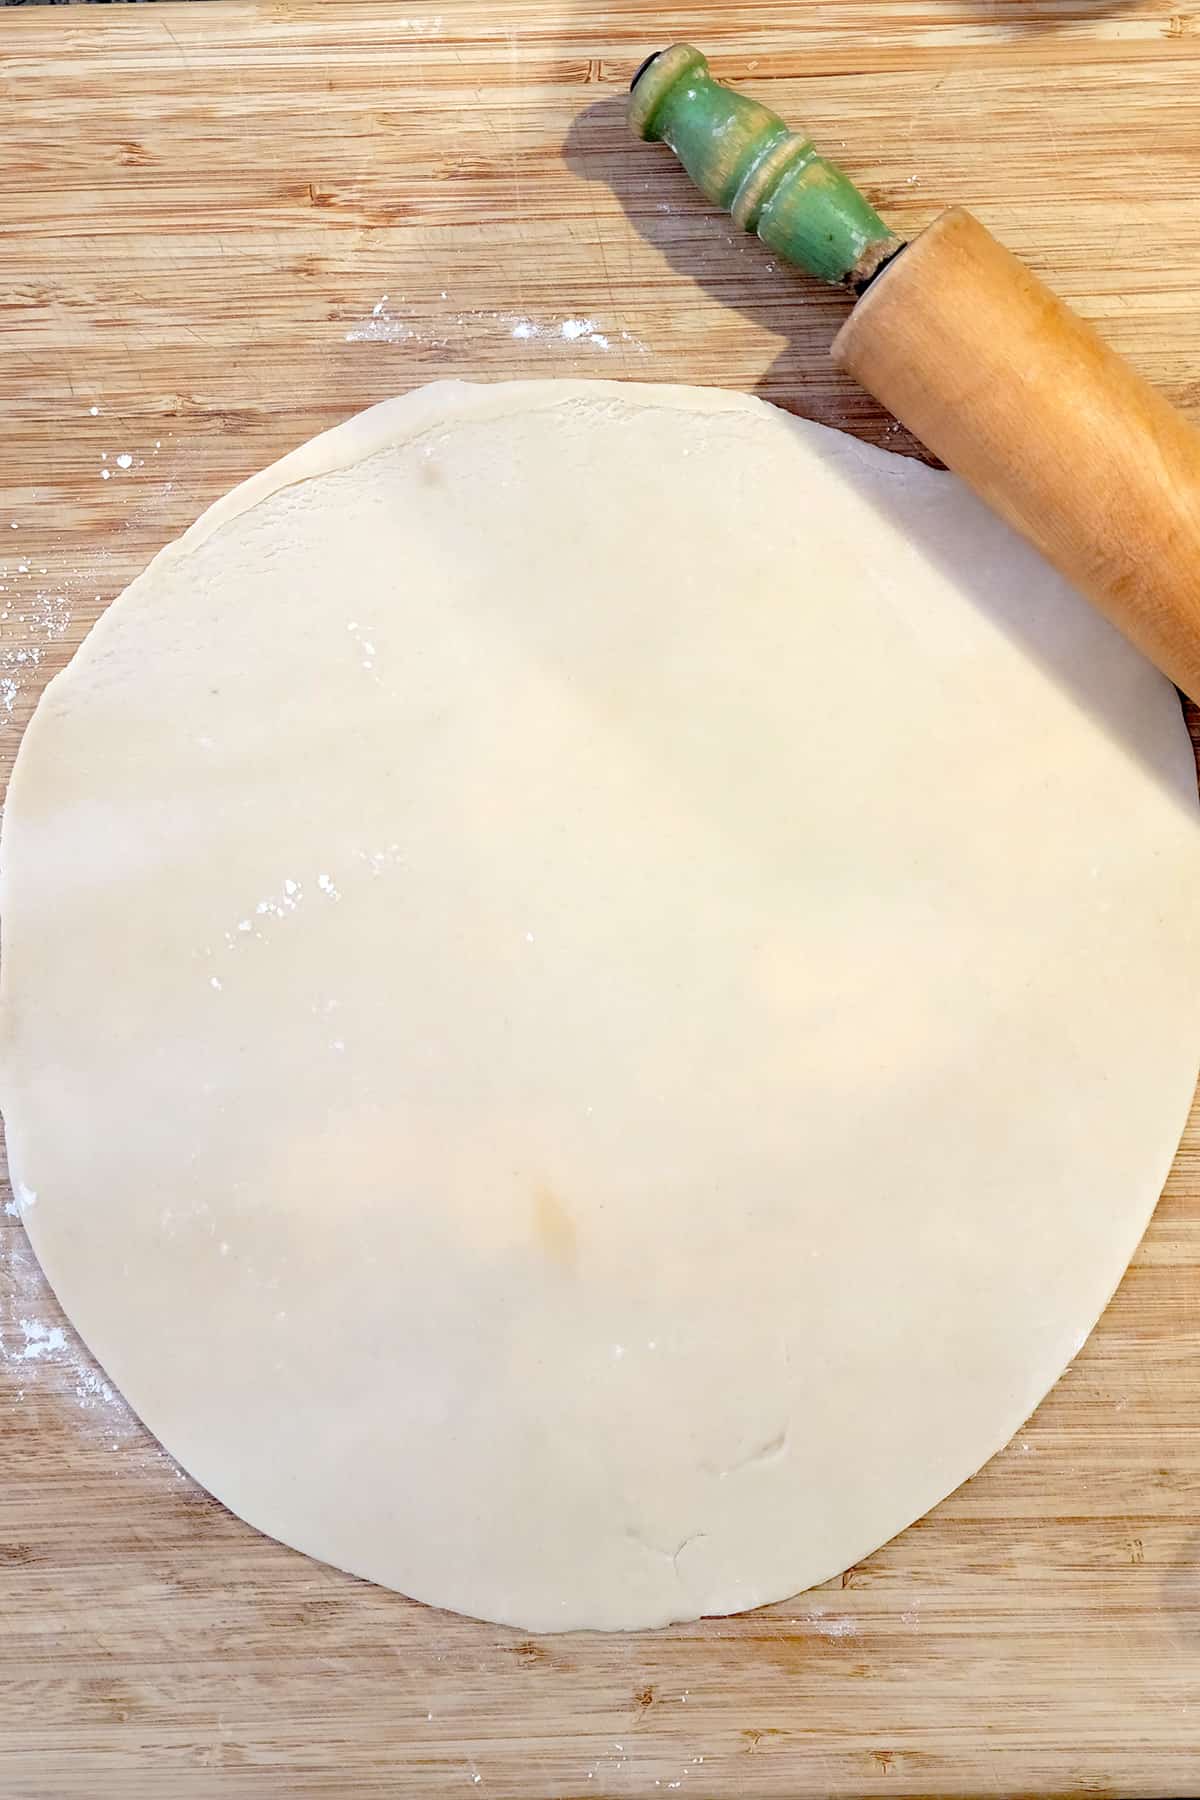 Pie crust rolled out on floured wooden board.